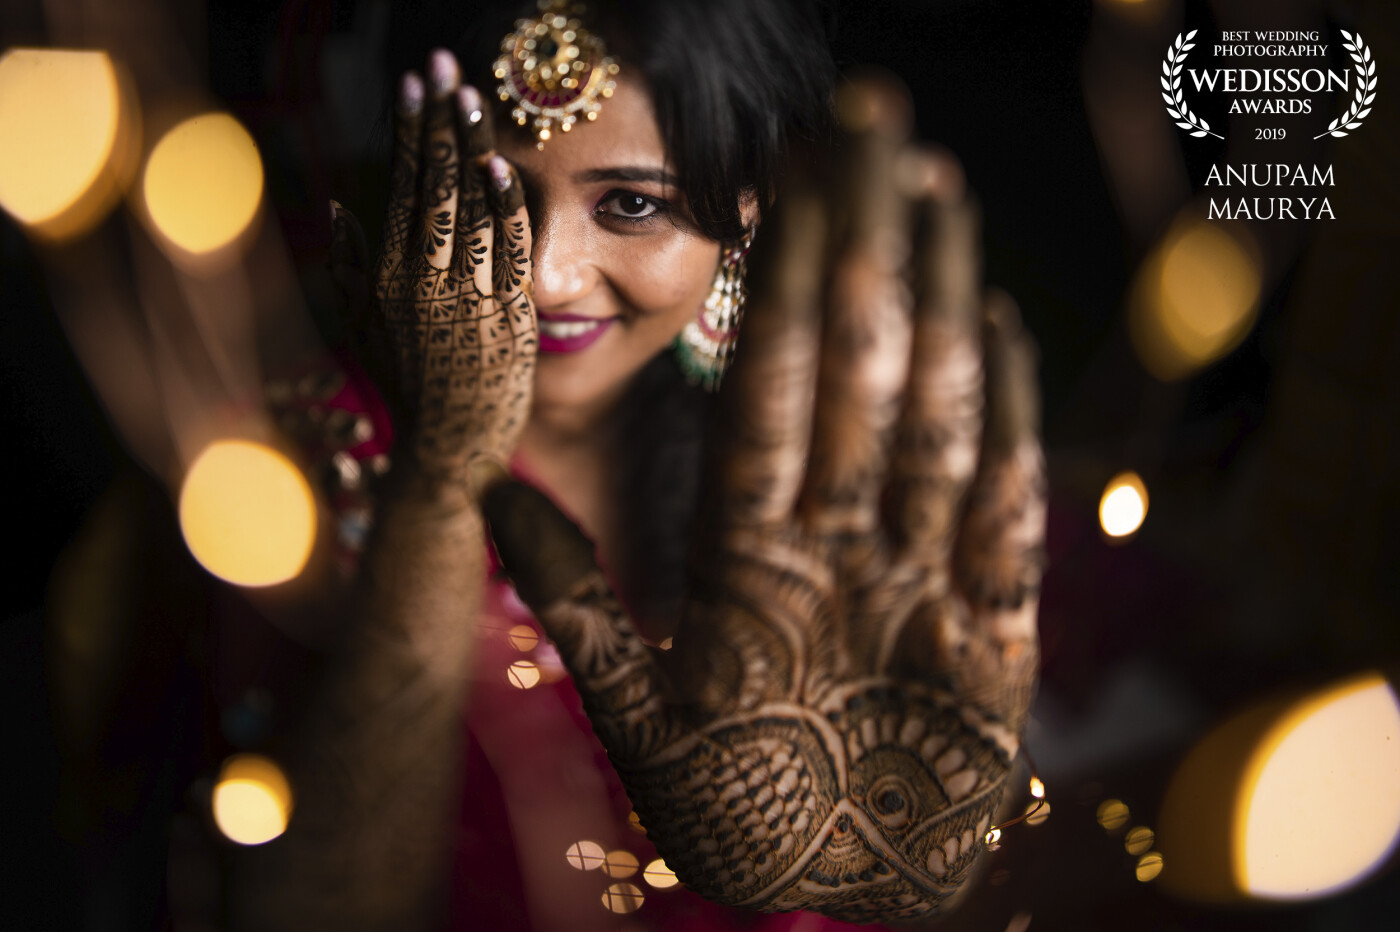 Photographs of henna on the bride's hands often the most cliche photos. I wanted to do something different and better. So I asked her to take out her left hand further ahead to form the foreground and focused on her eyes. At the same time, I used foreground blur using fairy lights and tilt-shift lens for a narrow horizontal focus. The result came out to be stunning and the bride absolutely loved it. I posted this same photo instantly by transferring on my phone from the camera. I knew this was a winner. 